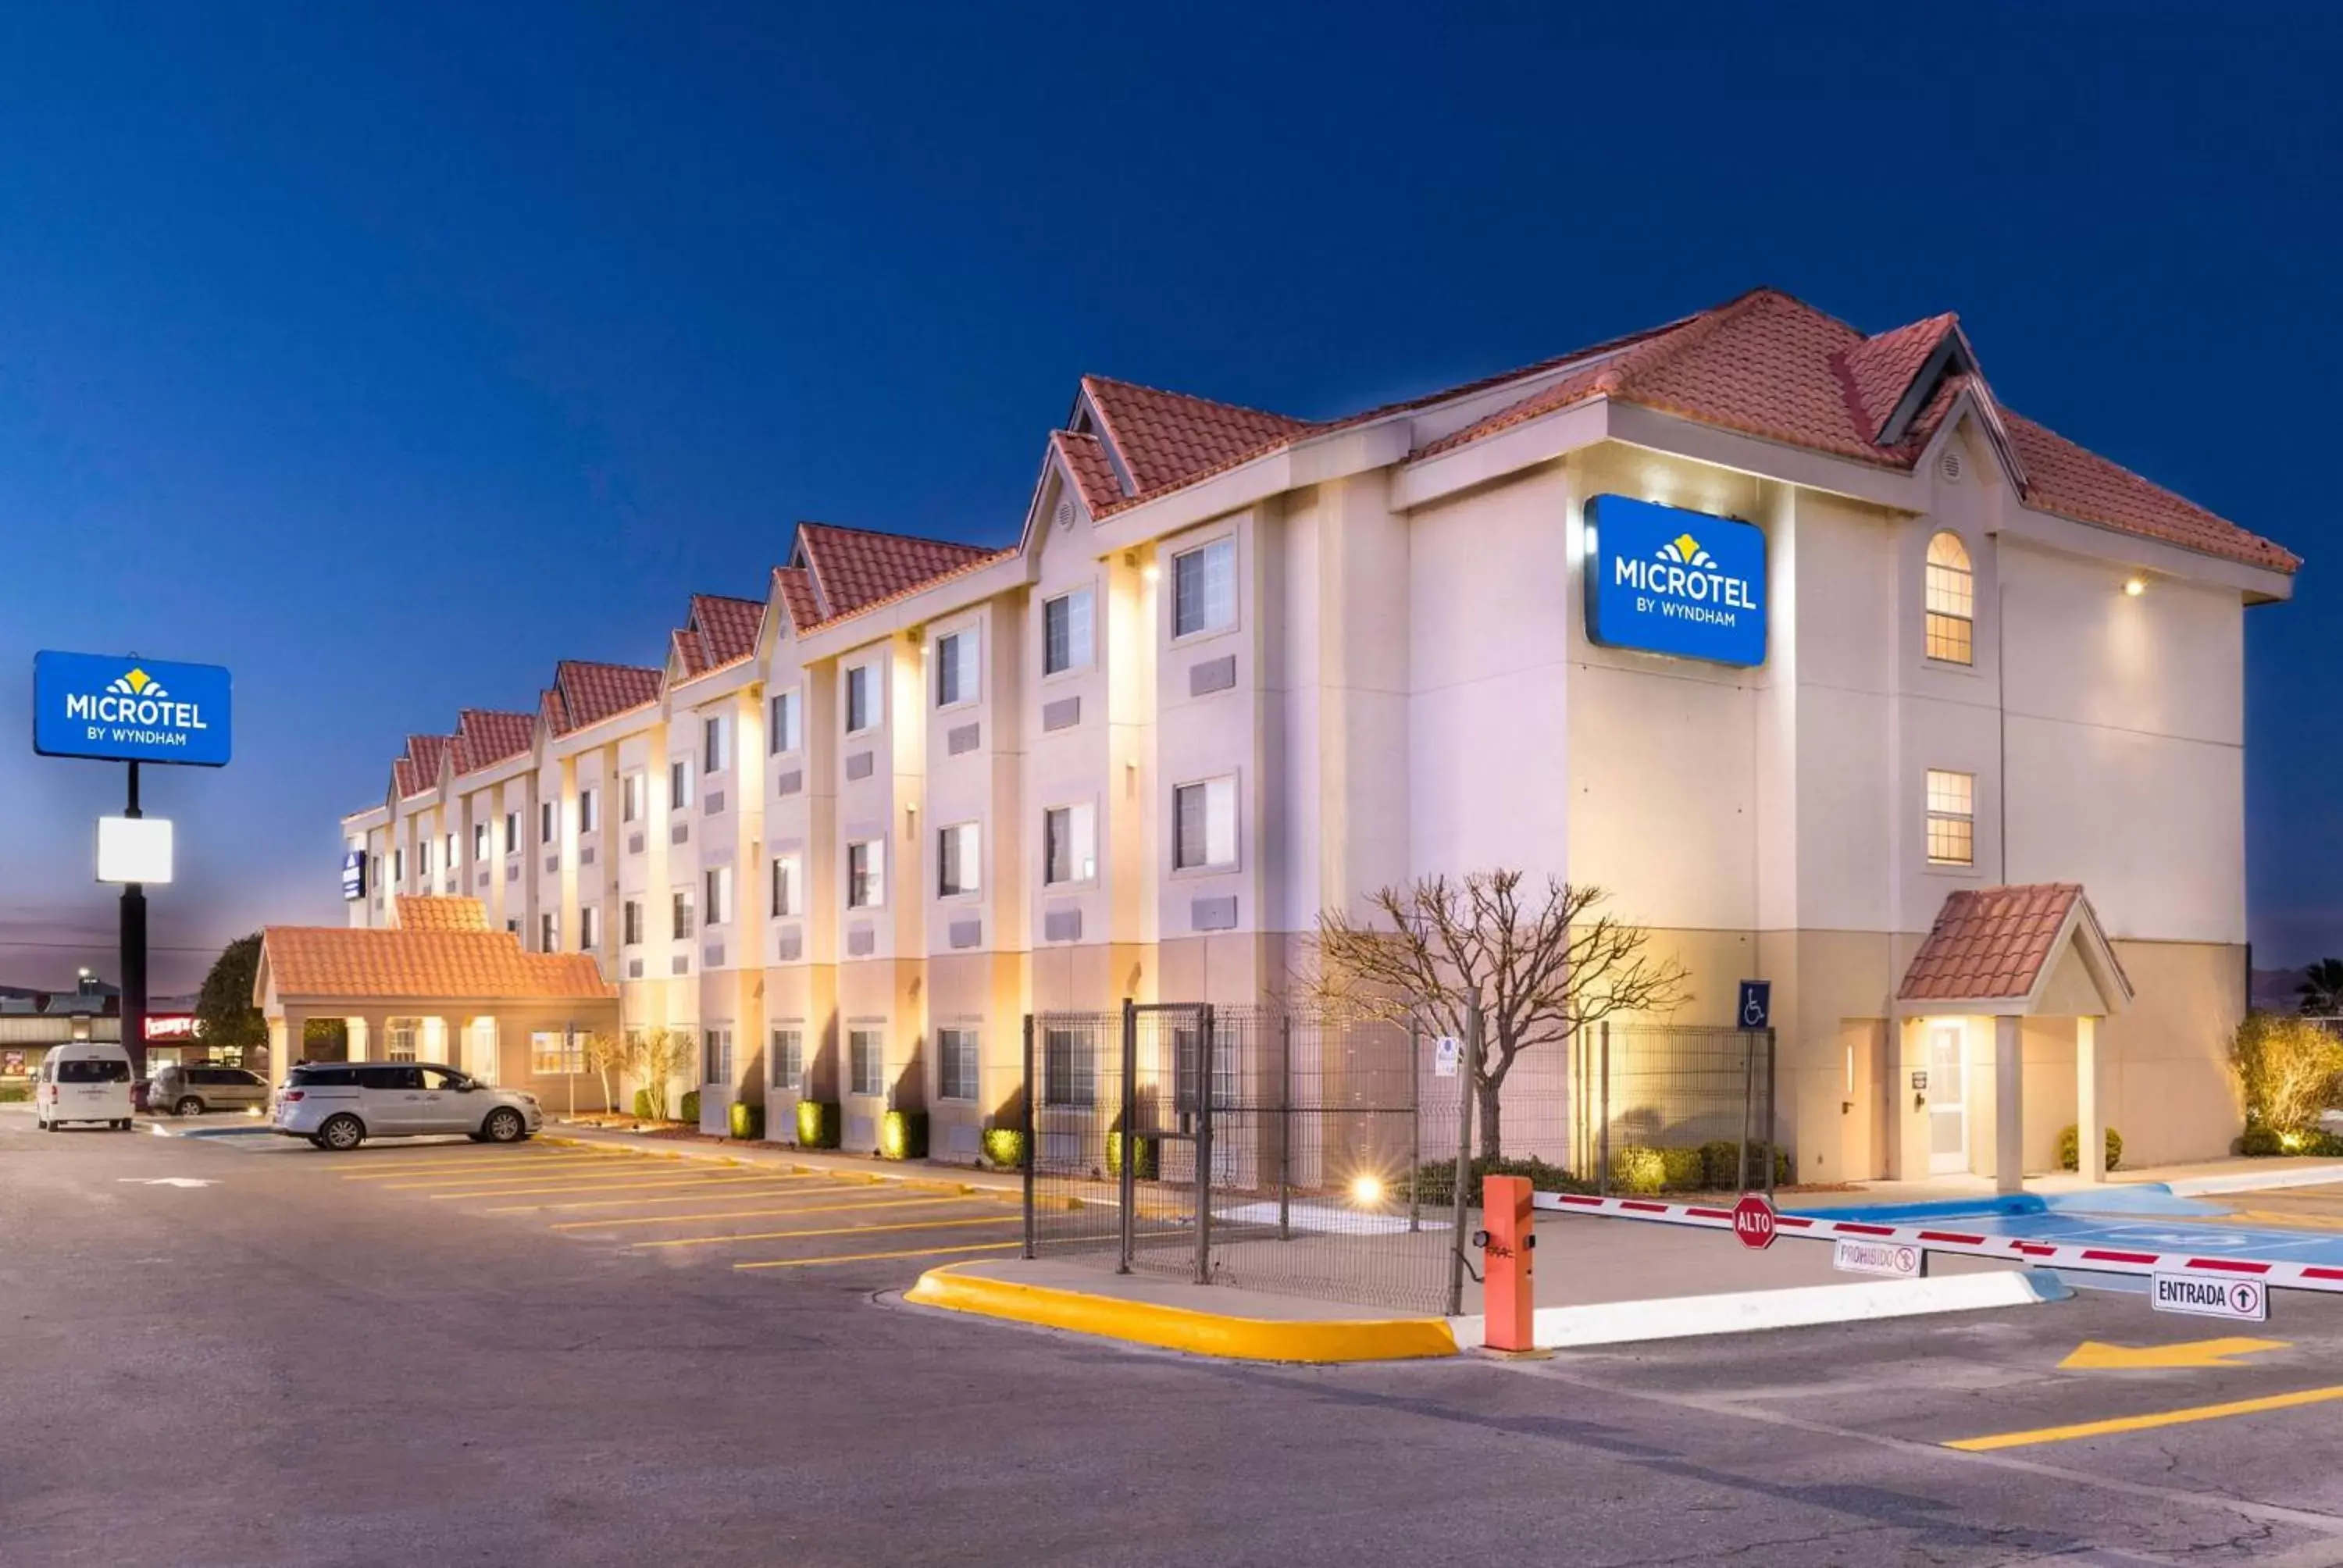 Property Building in Microtel Inn & Suites by Wyndham Chihuahua